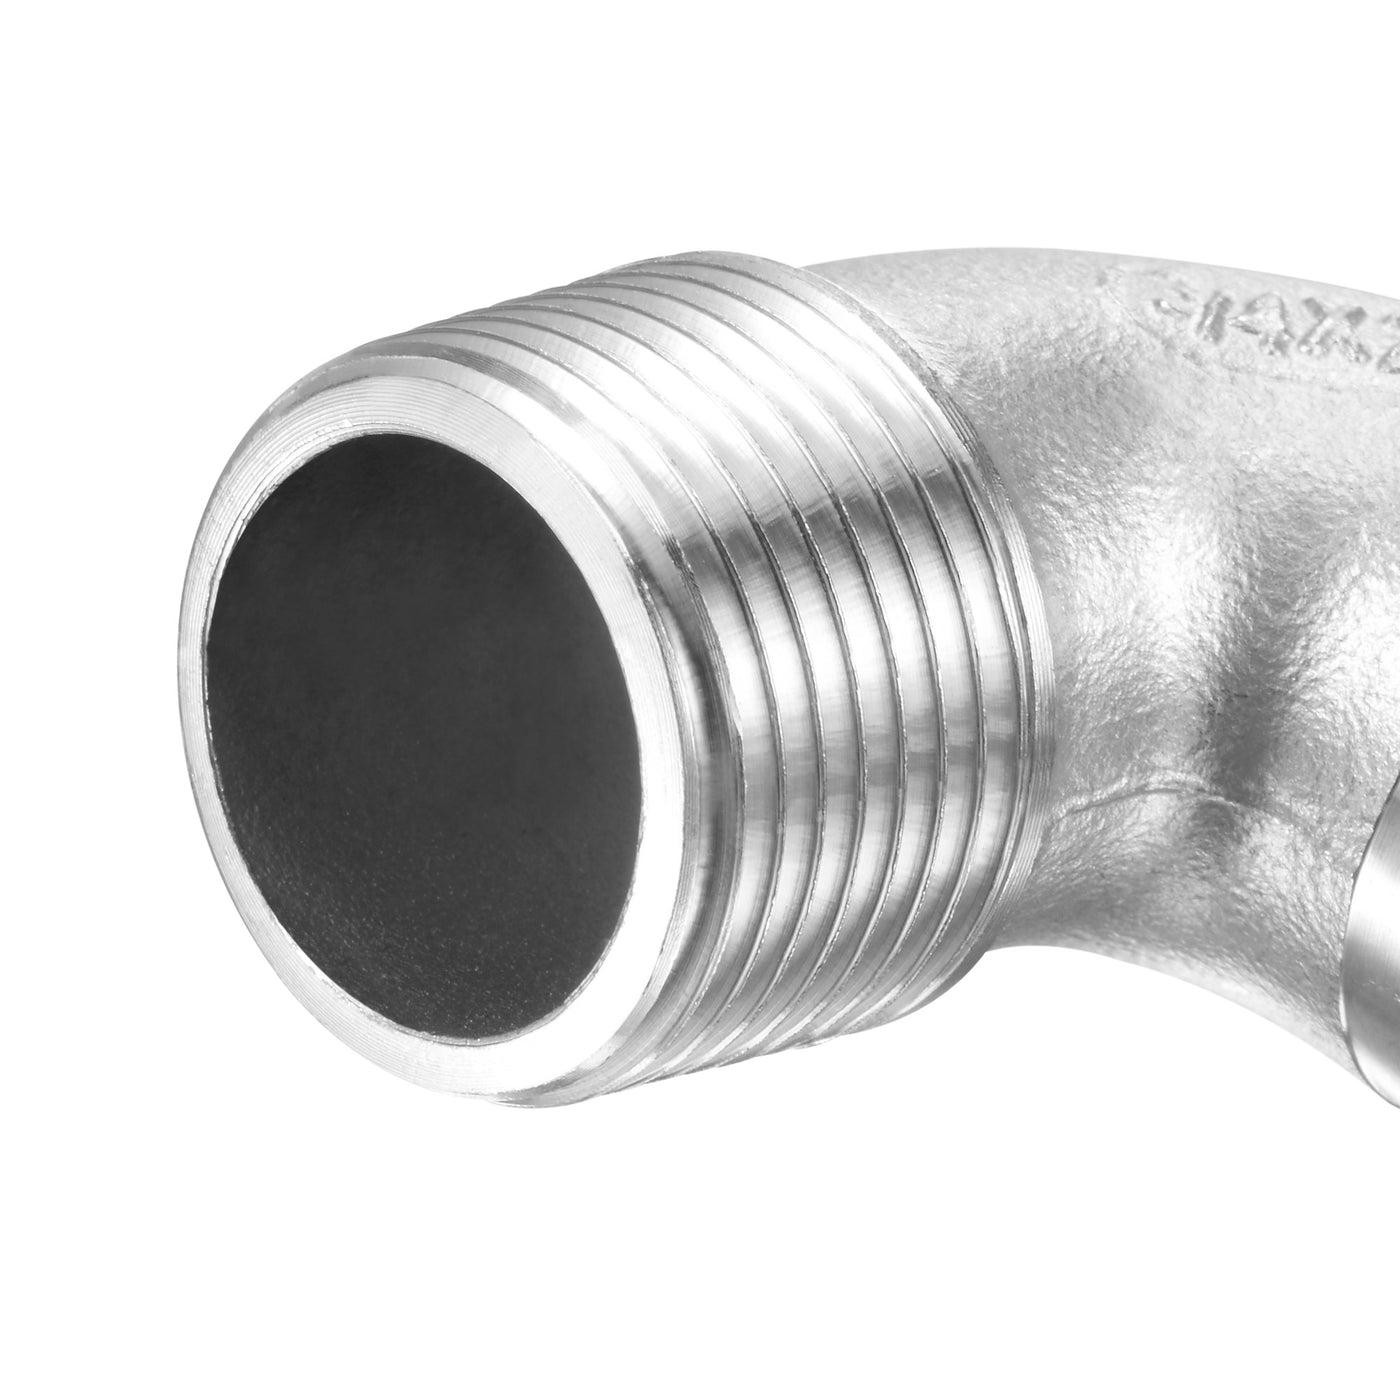 Uxcell Uxcell Stainless Steel Hose Barb Fitting Elbow 20mm x G3/4 Male Pipe Connector 2pcs